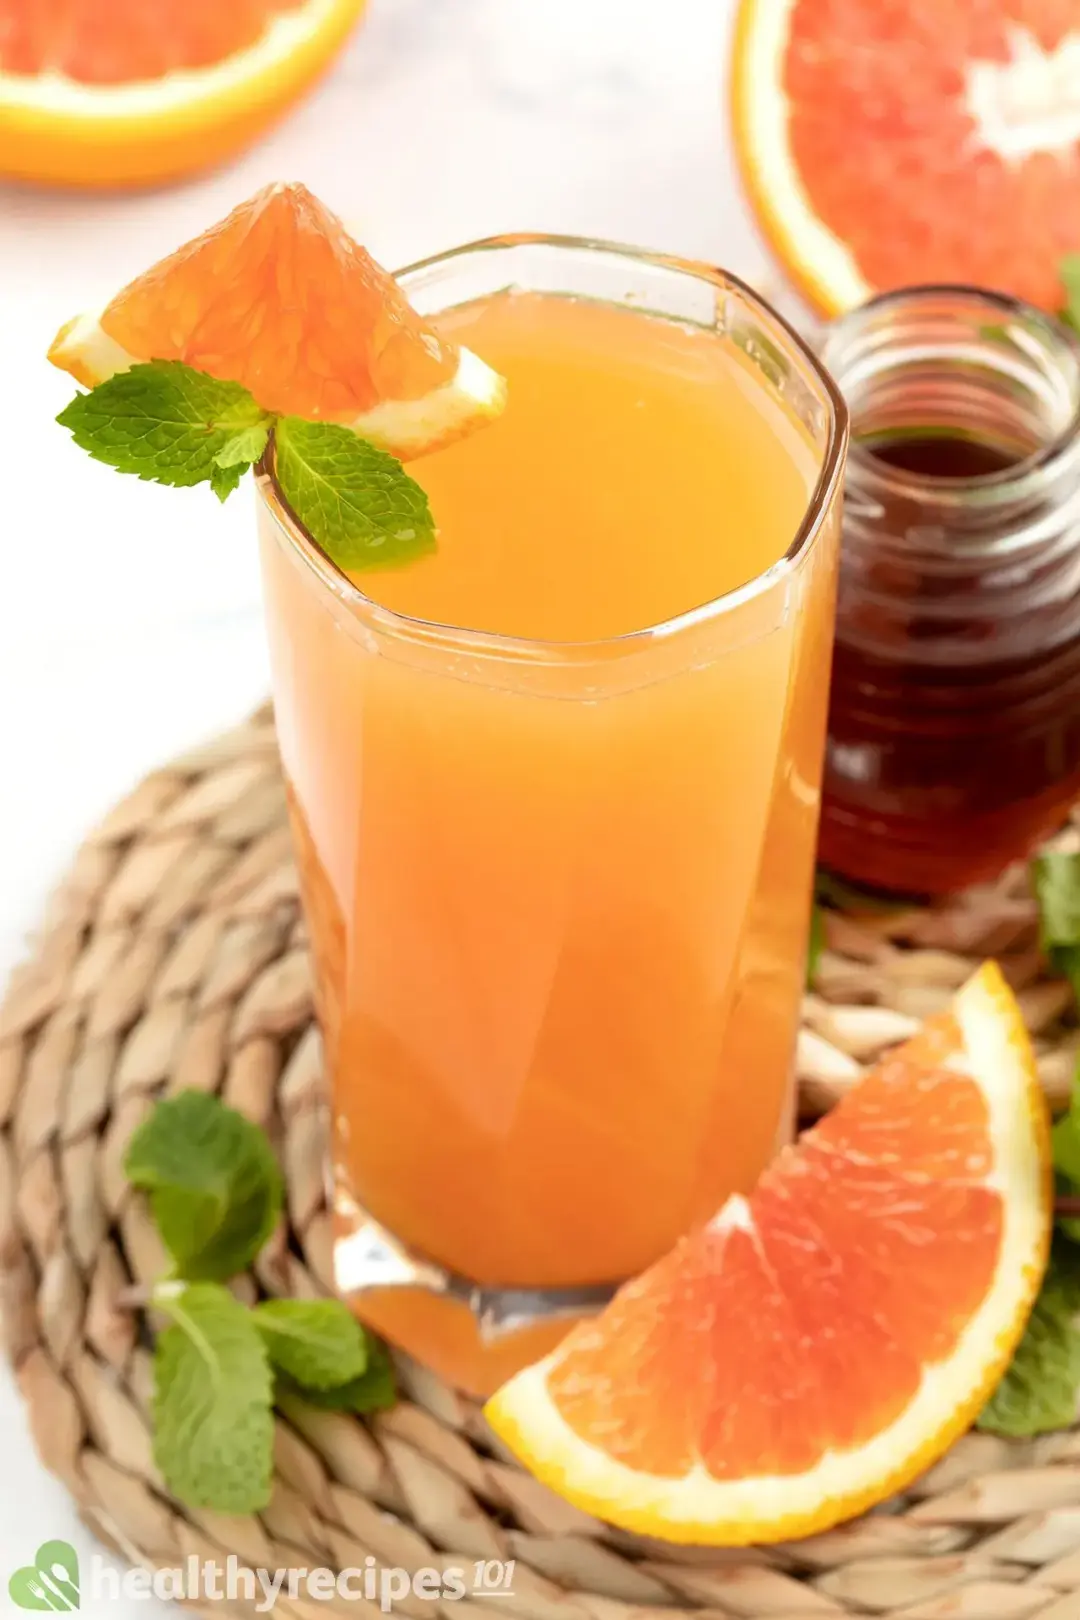 A glass of grapefruit juice garnished with mints, grapefruit wedges, next to a honey jar